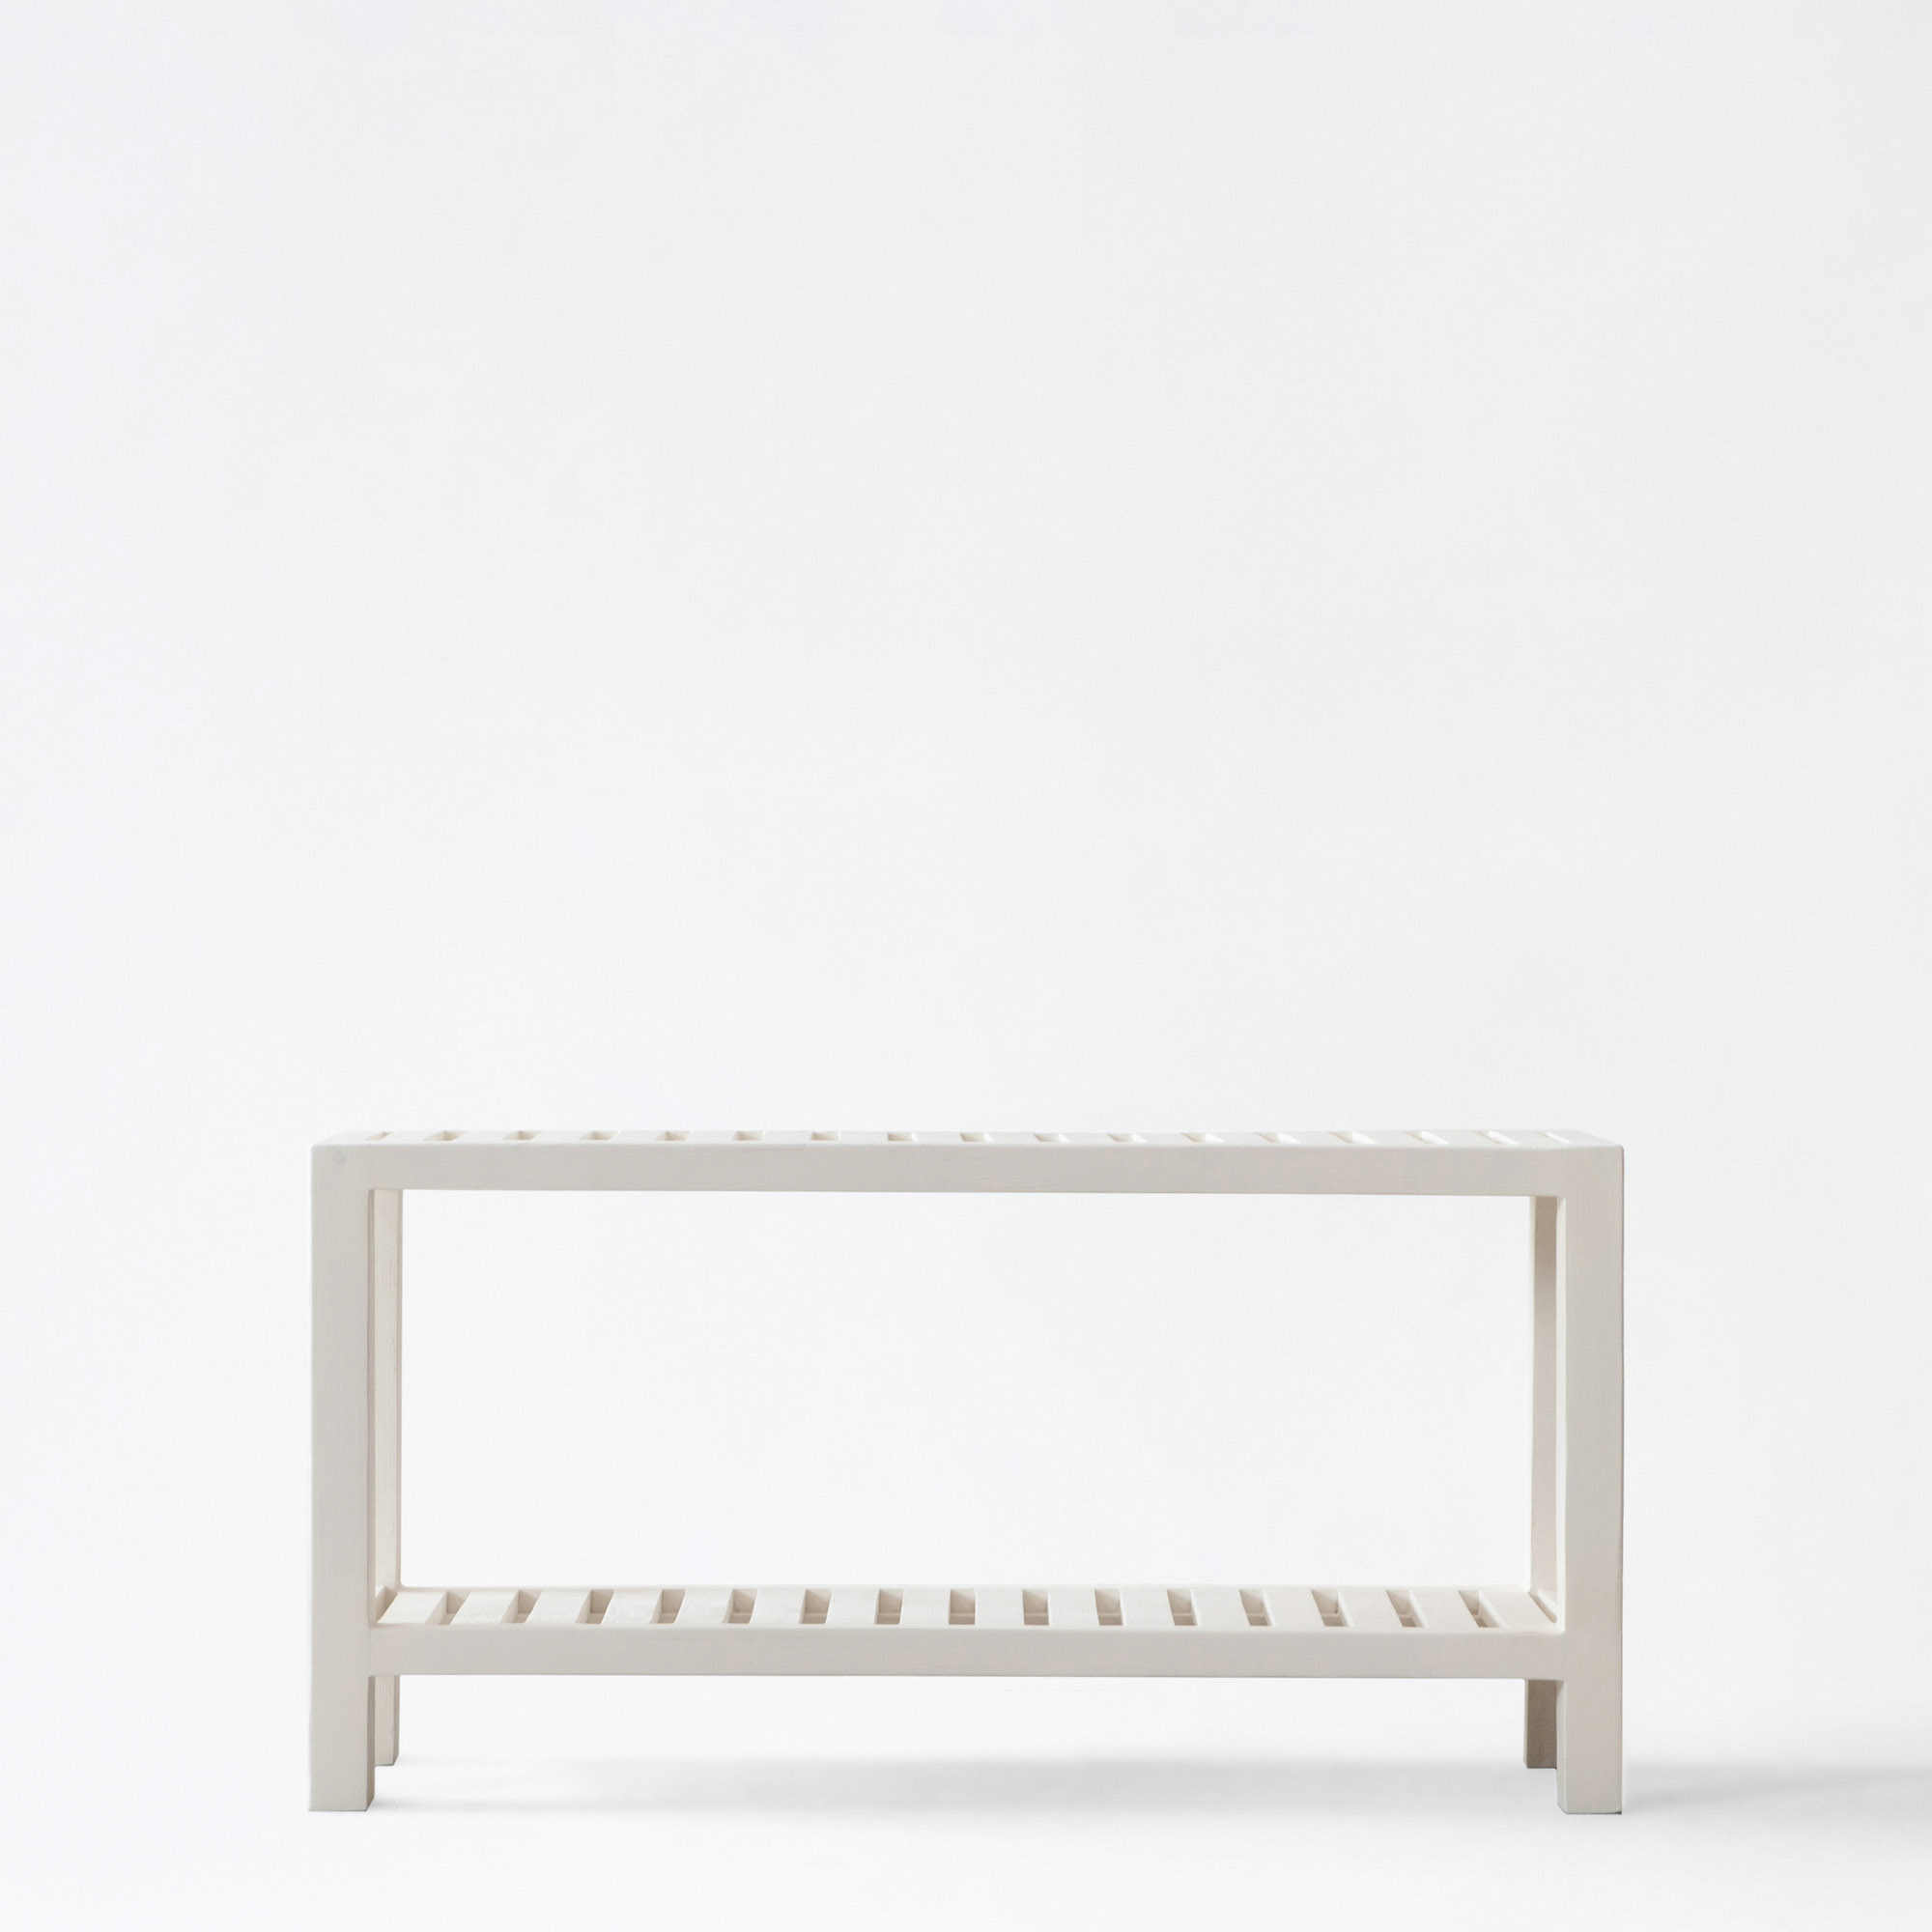 Fawn Wooden Bench